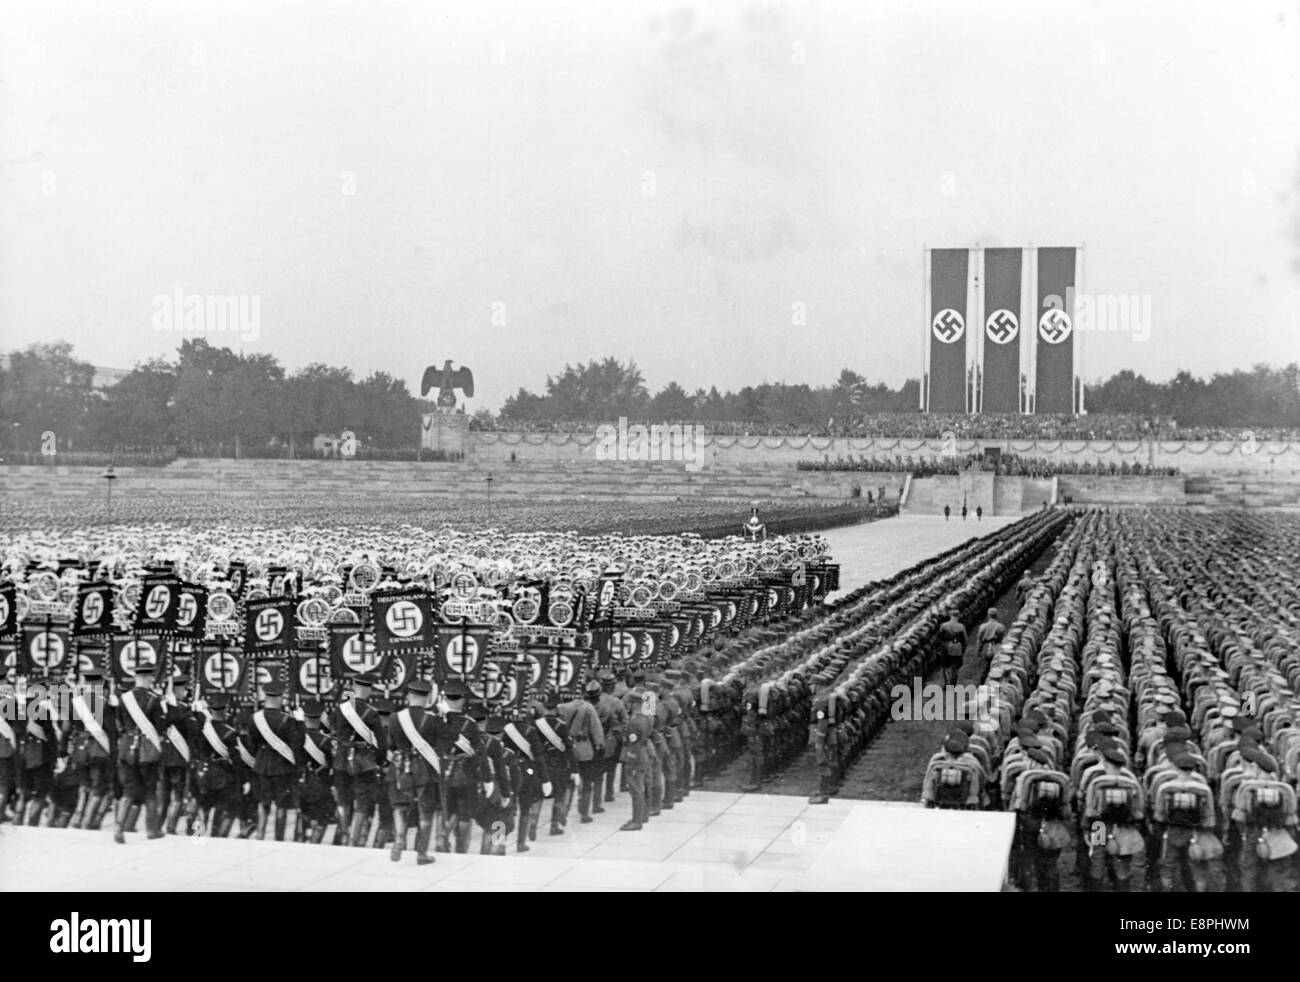 Nuremberg Rally in Nuremberg, Germany - Nazi party rally grounds - March-in of the standards for the great roll call of Sturmabteilung (SA), Schutzstaffel (SS), National Socialist Motor Corps (NSKK) and National Socialist Flyers Corps (NSFK). (Flaws in quality due to the historic picture copy) Fotoarchiv für Zeitgeschichtee - NO WIRE SERVICE - Stock Photo